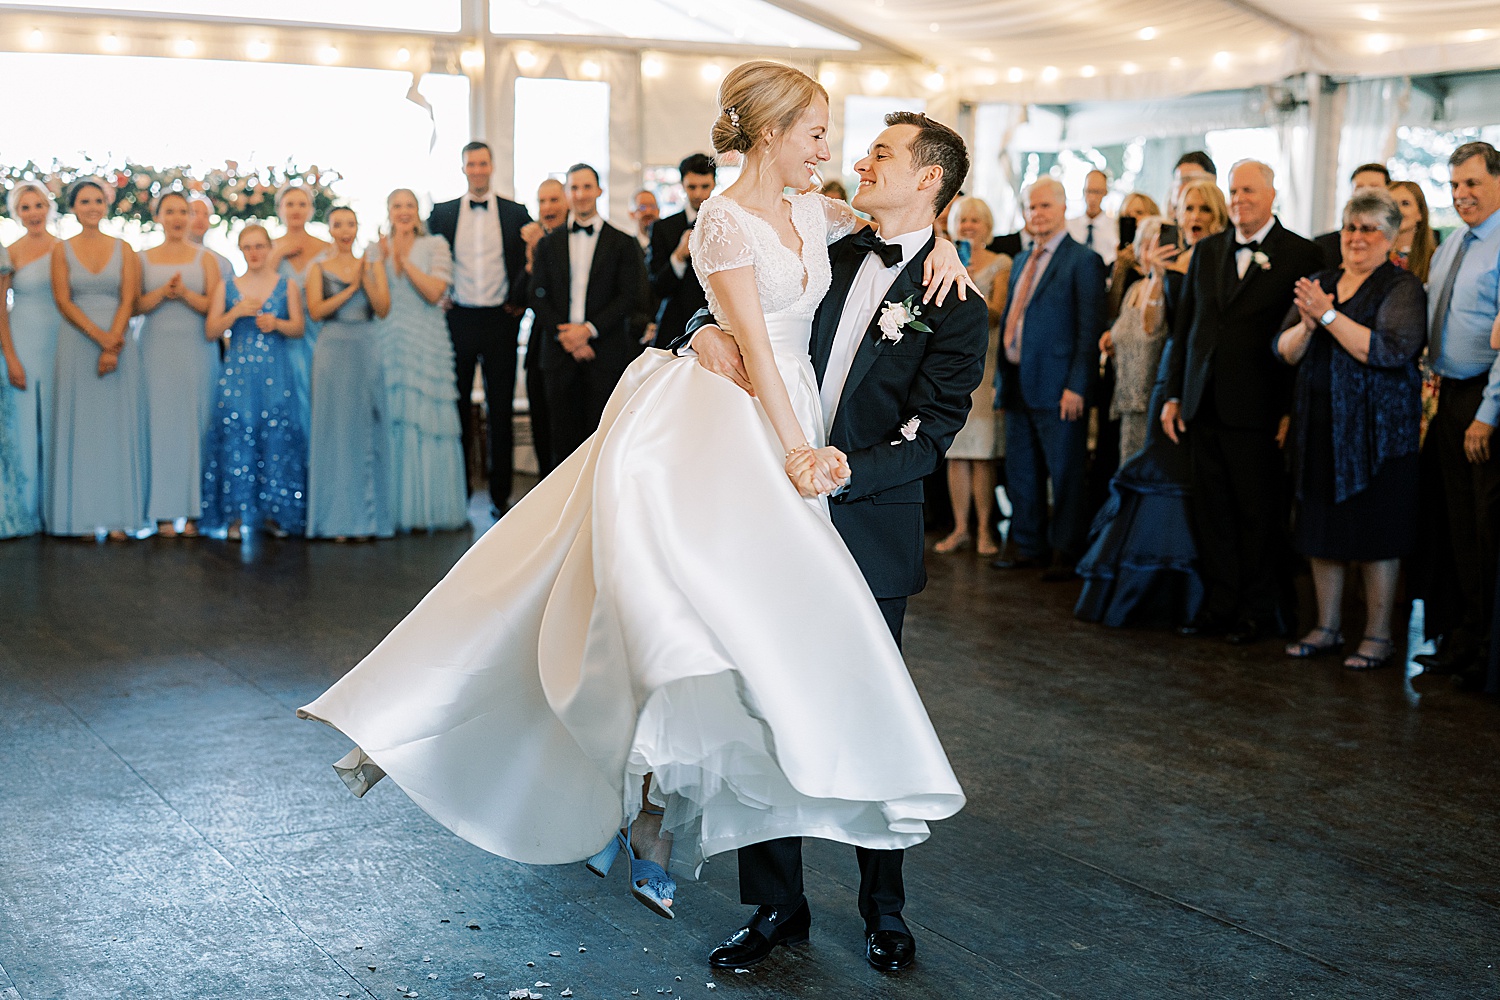 groom lifts bride twirling her during first dance 